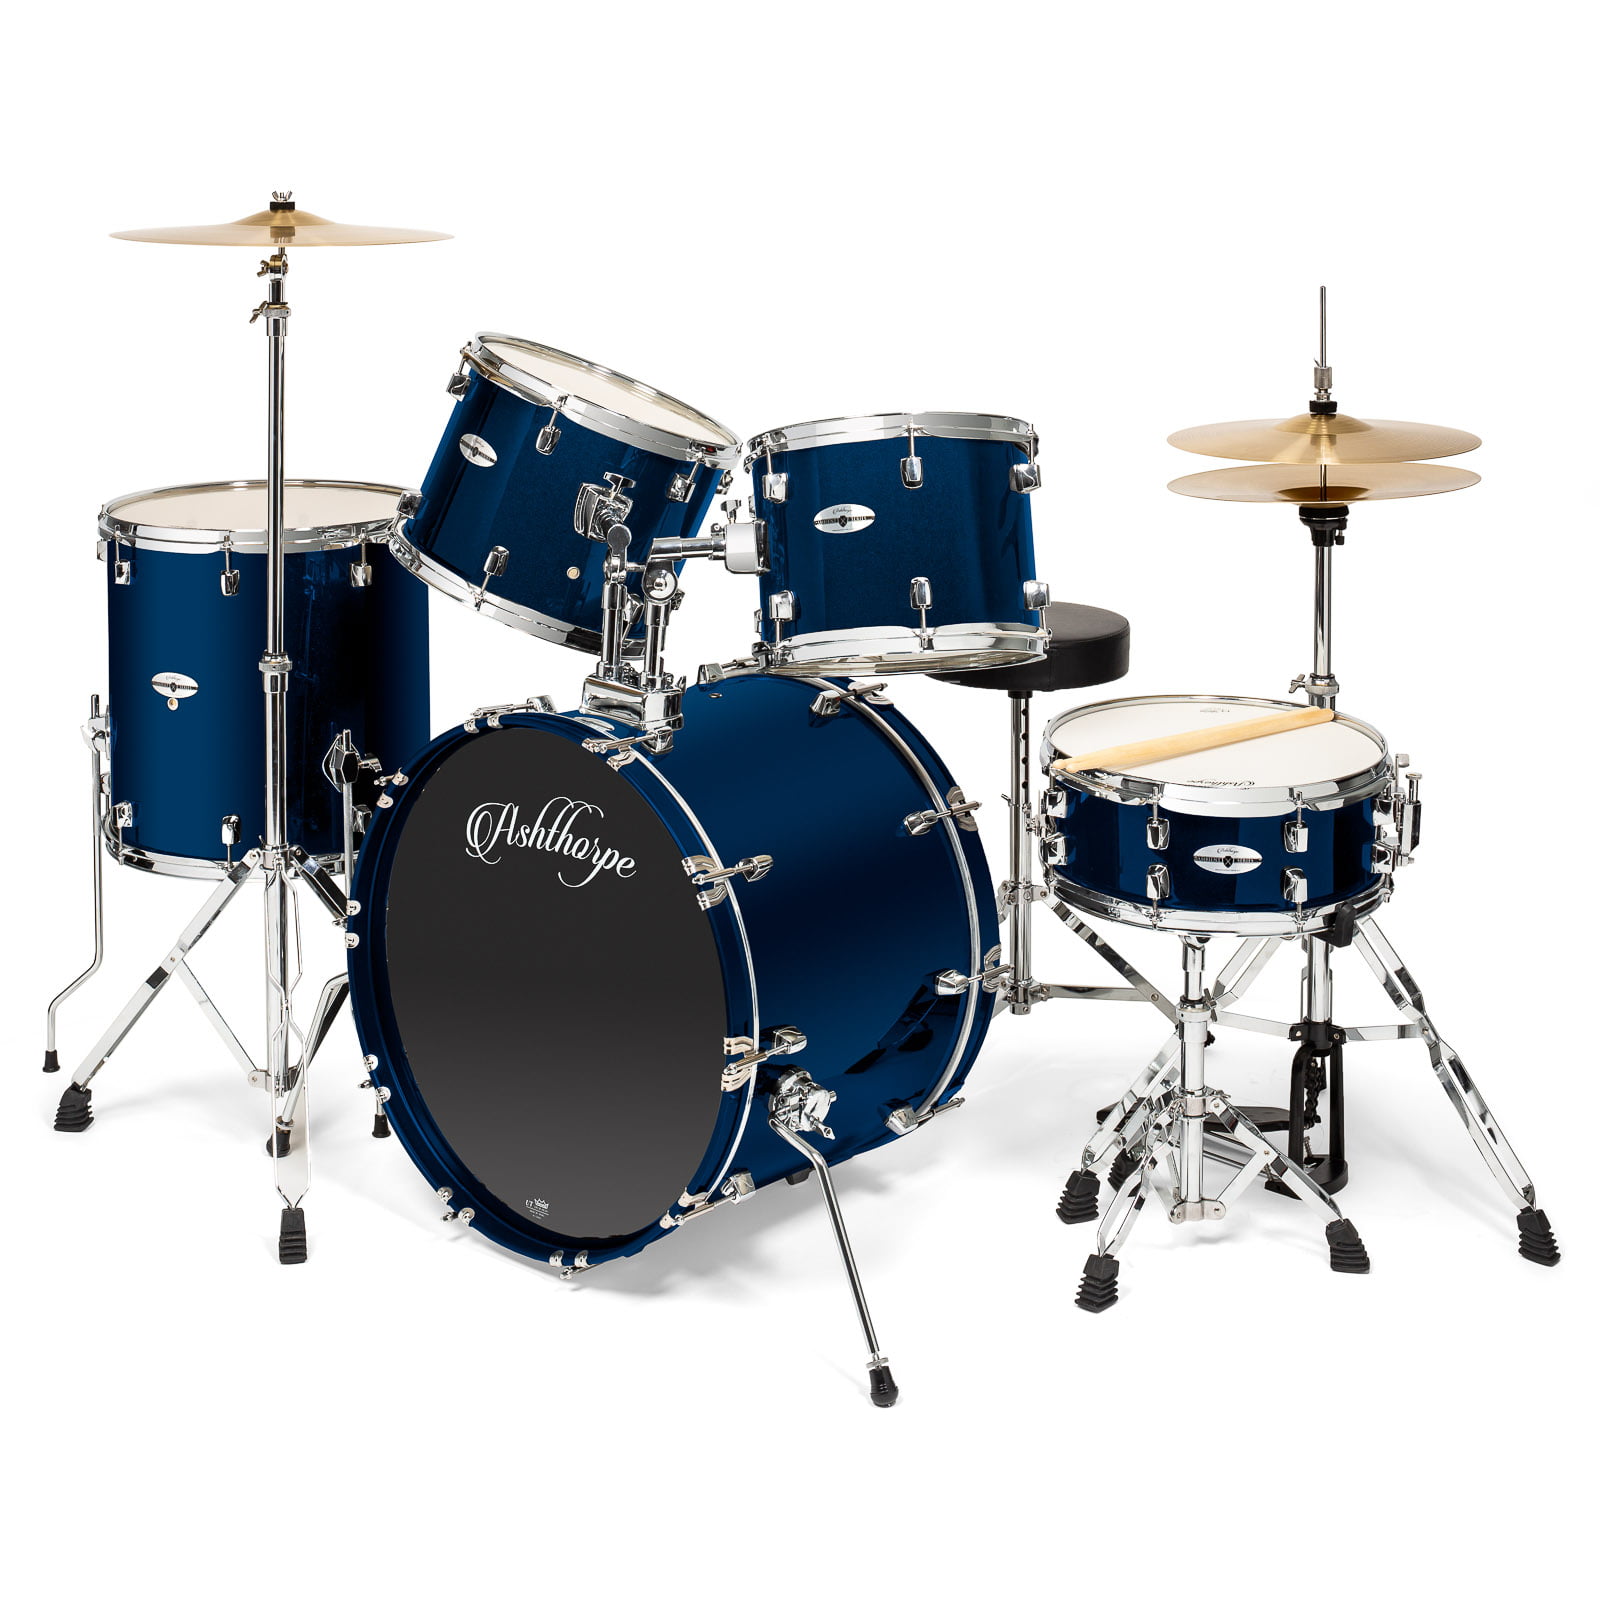 Ashthorpe 5Piece Full Size Adult Drum Set with Remo Heads